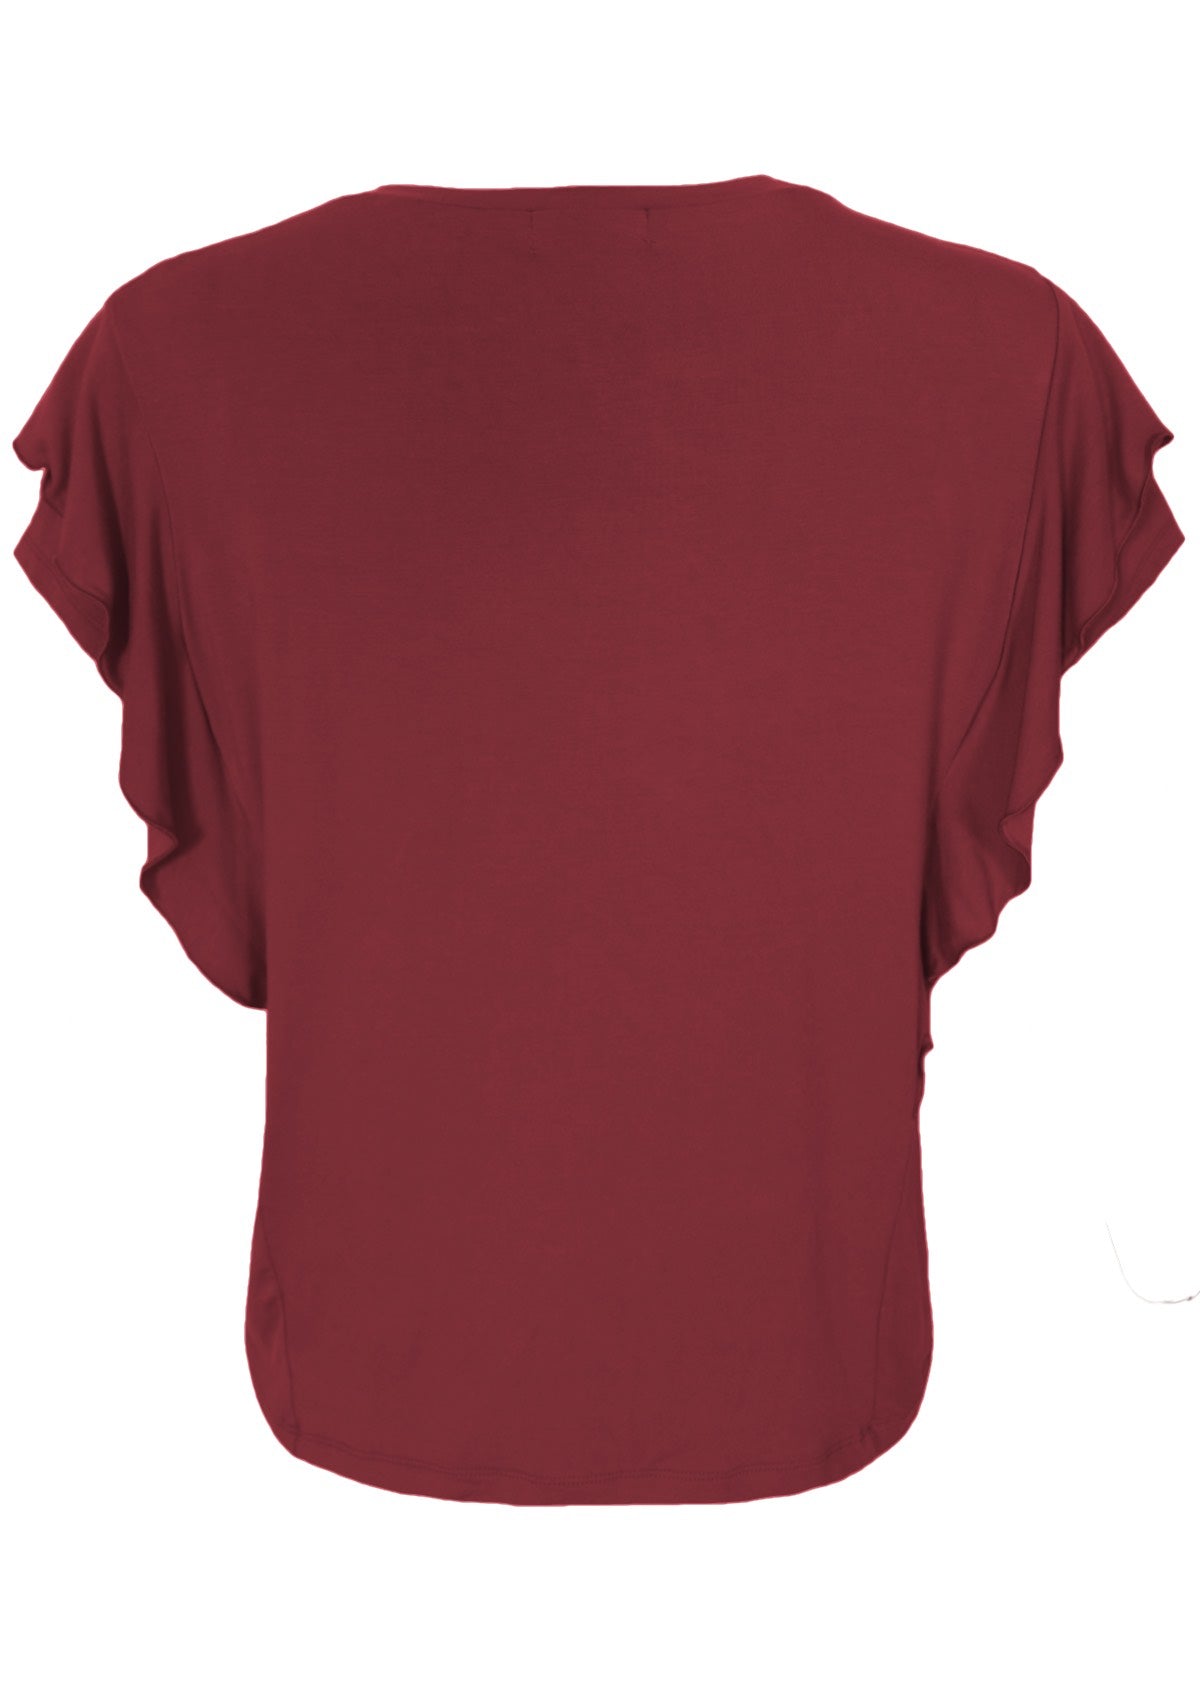 Side view of a women's maroon ruffle rayon top.